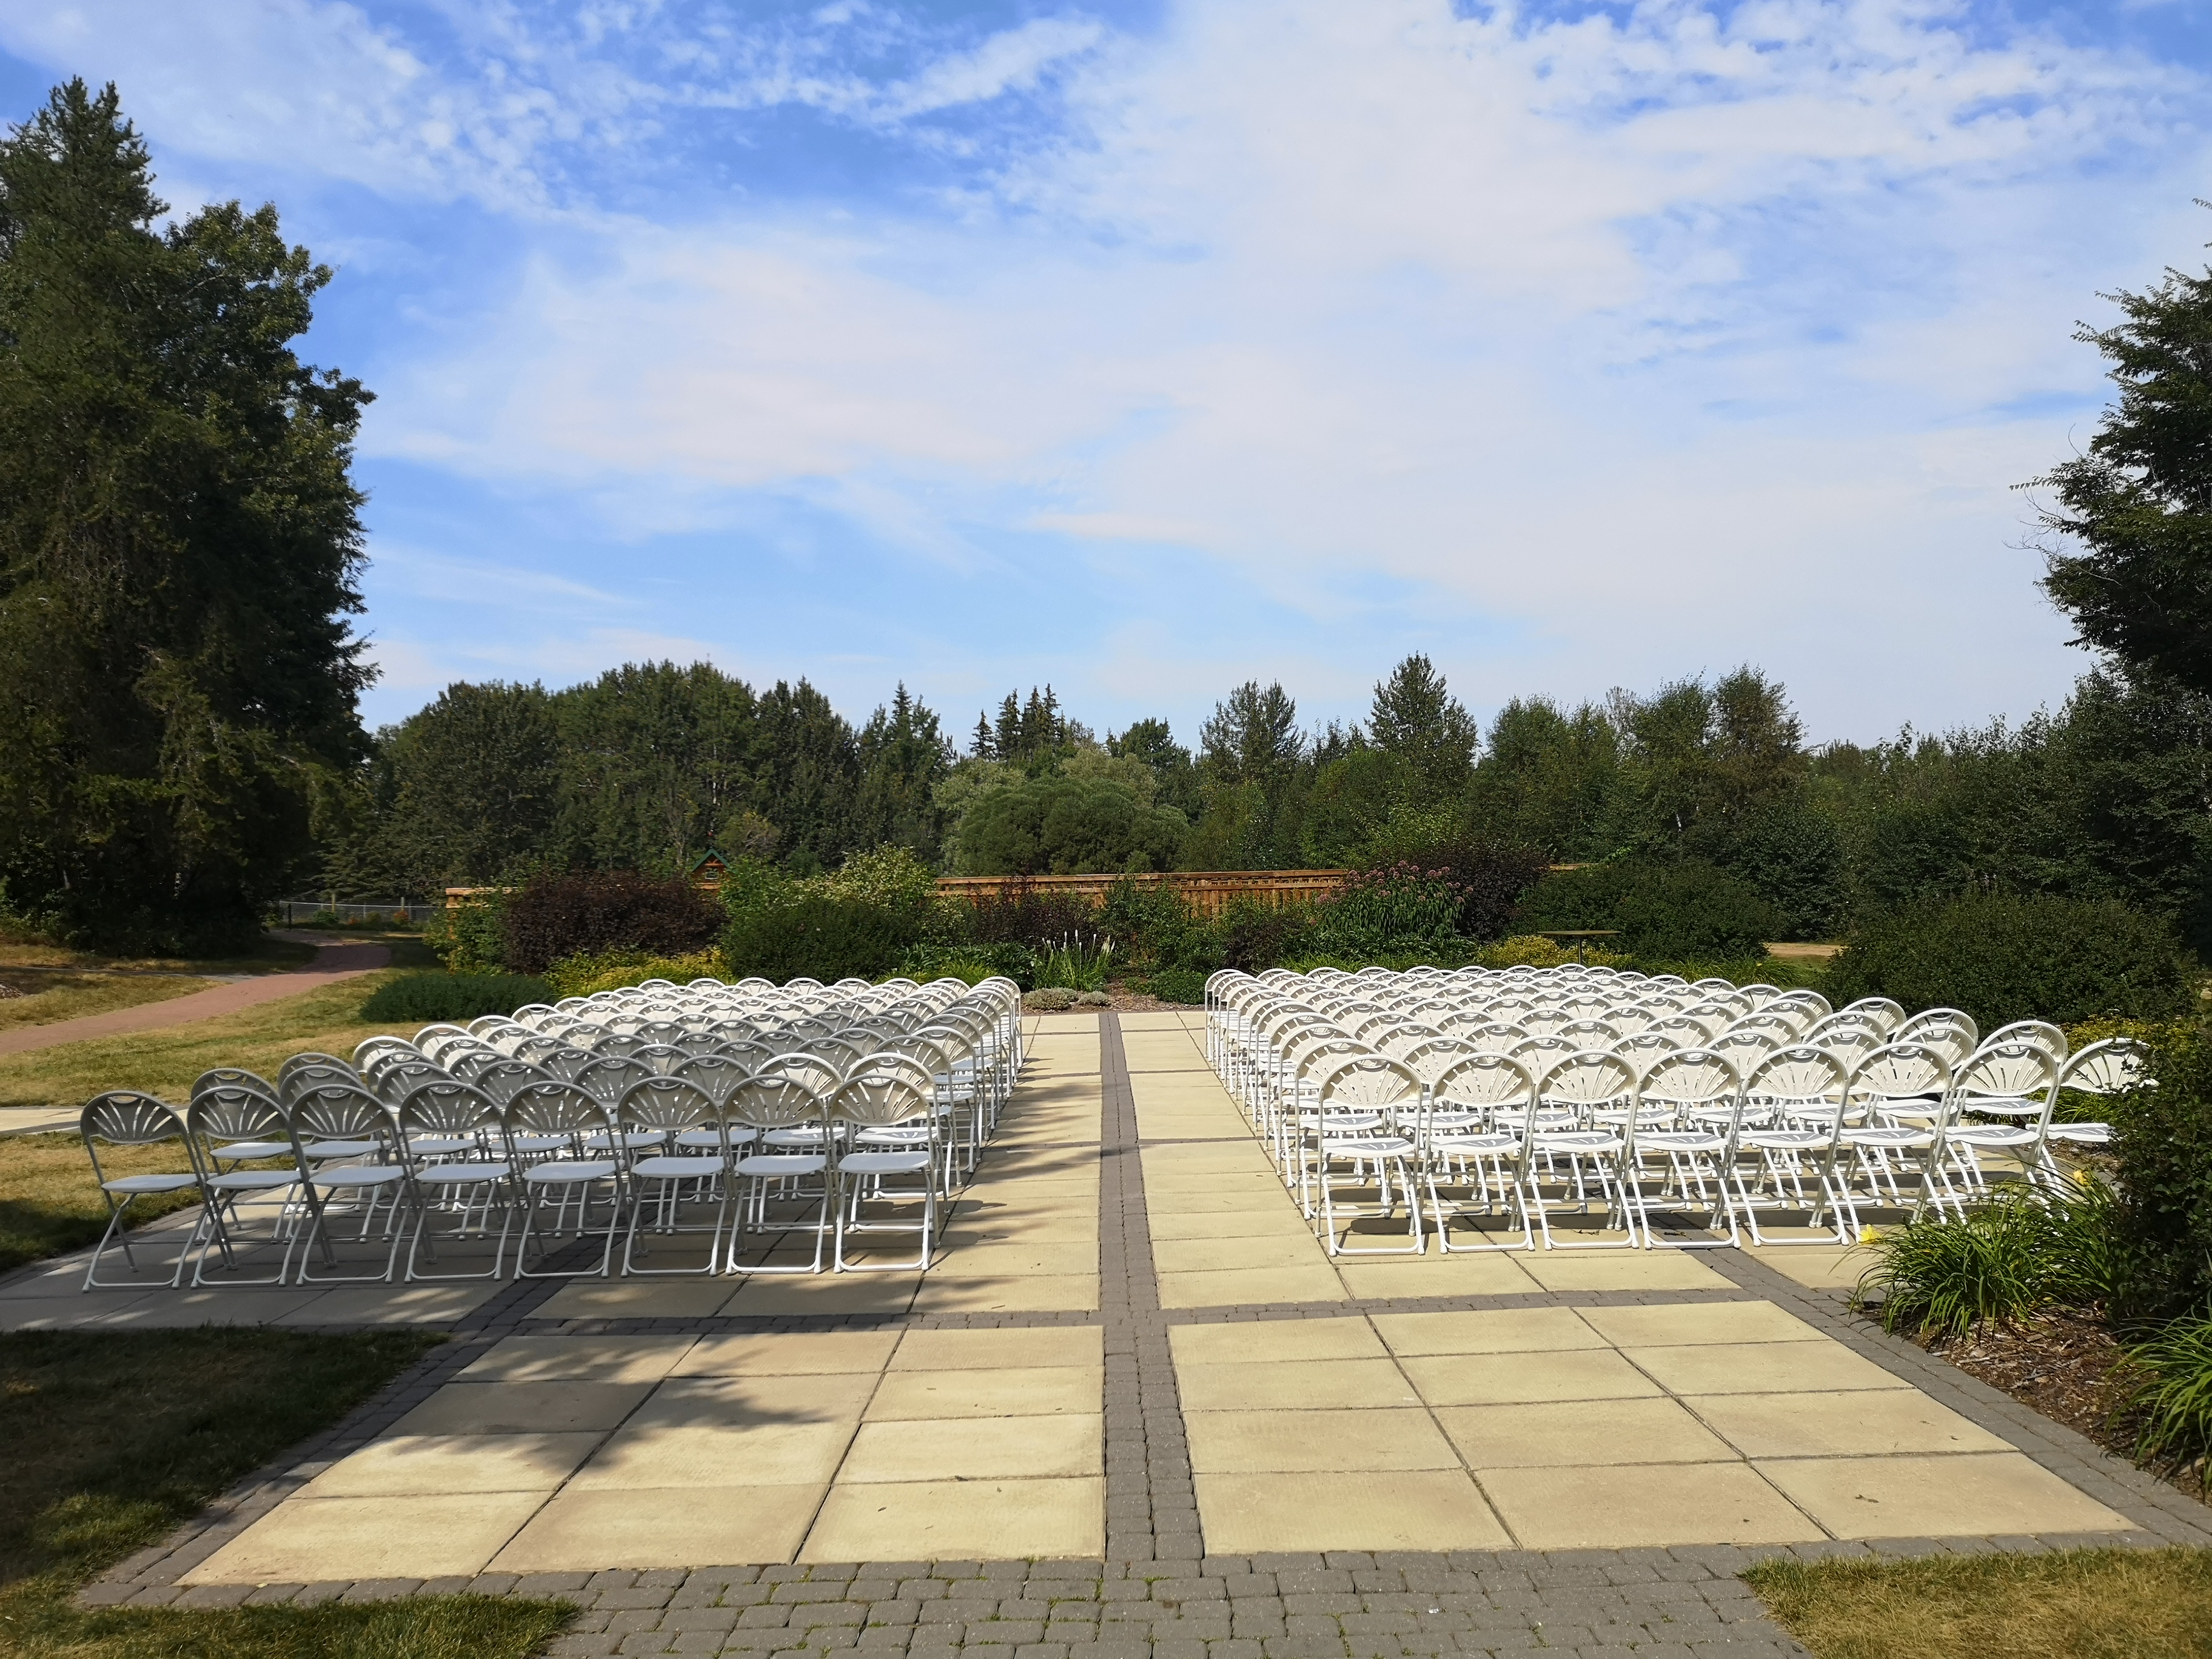 Wedding Patio from behind with white chairs setup